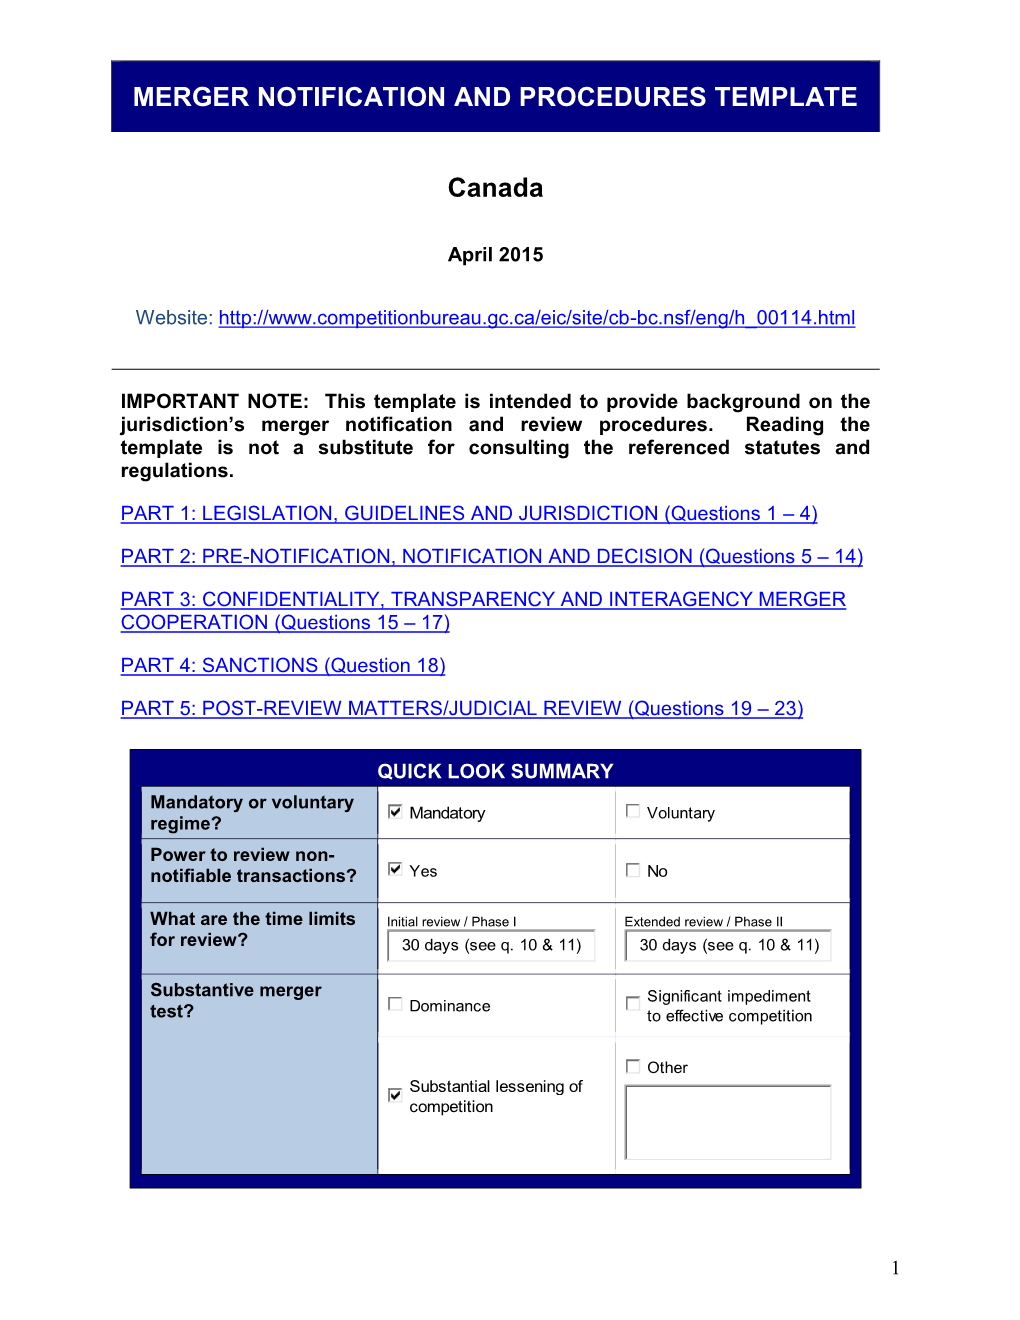 MERGER NOTIFICATION and PROCEDURES TEMPLATE Canada